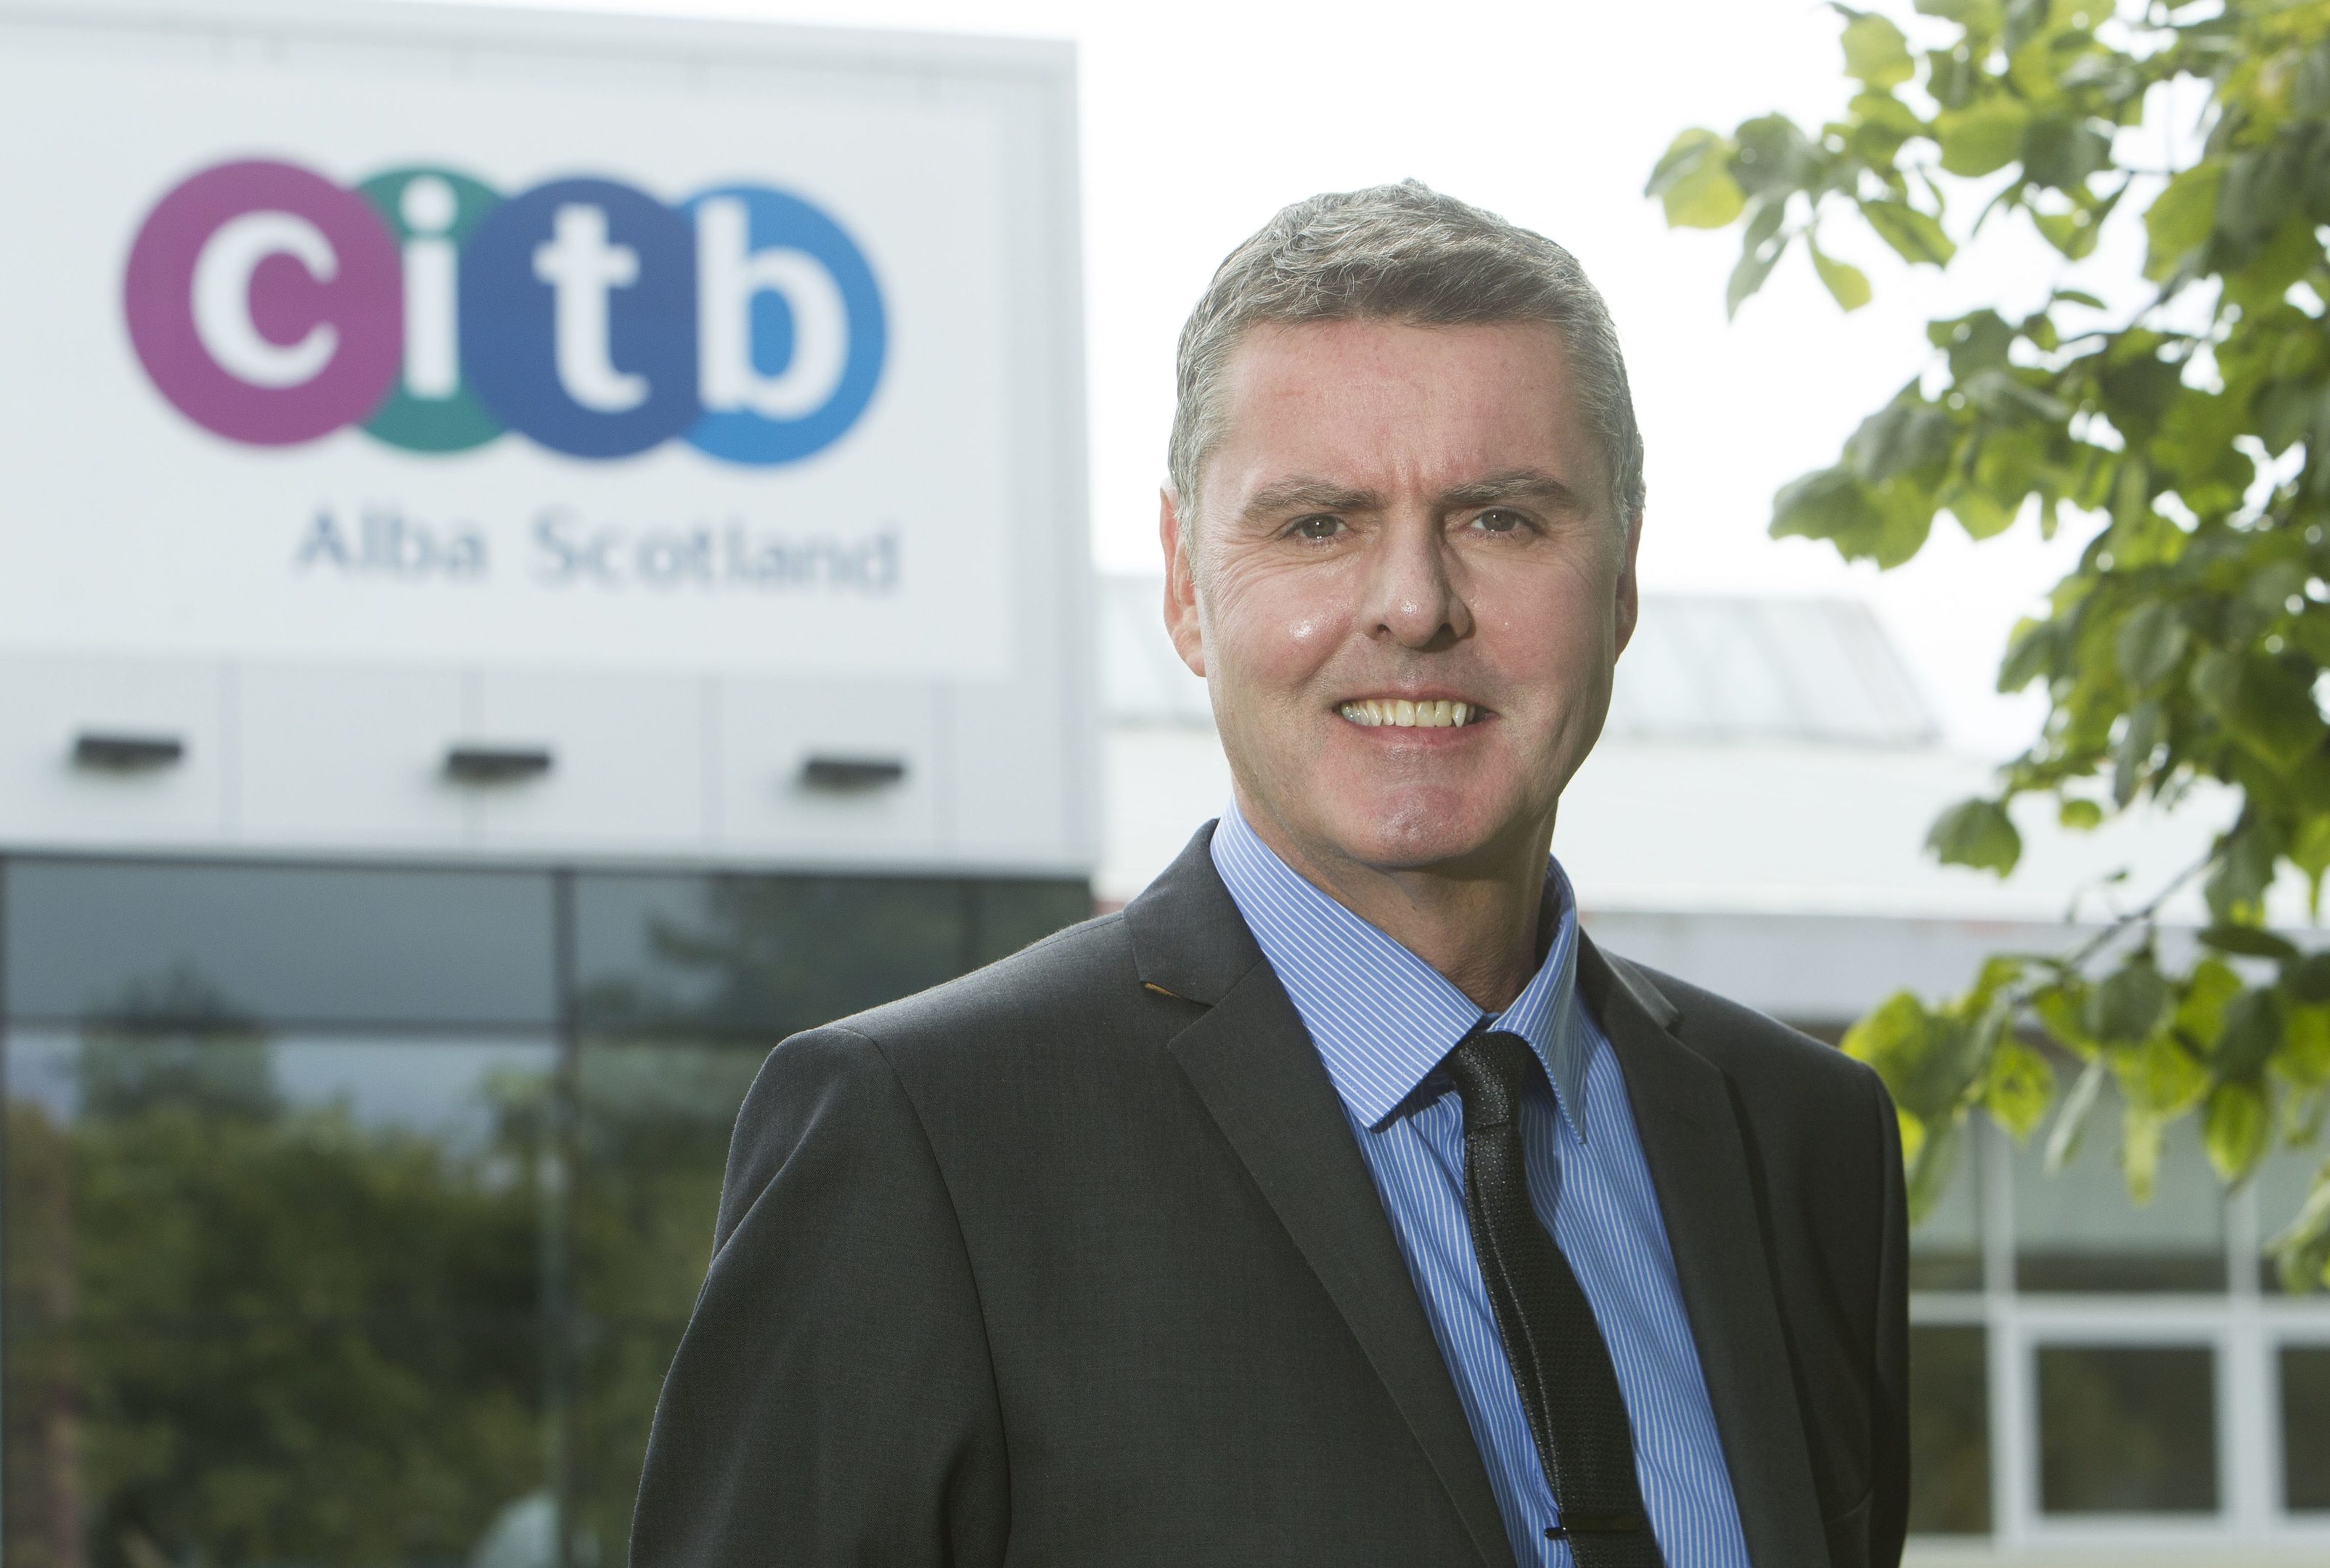 CITB to invest £3m to increase and retain new talent in Scotland